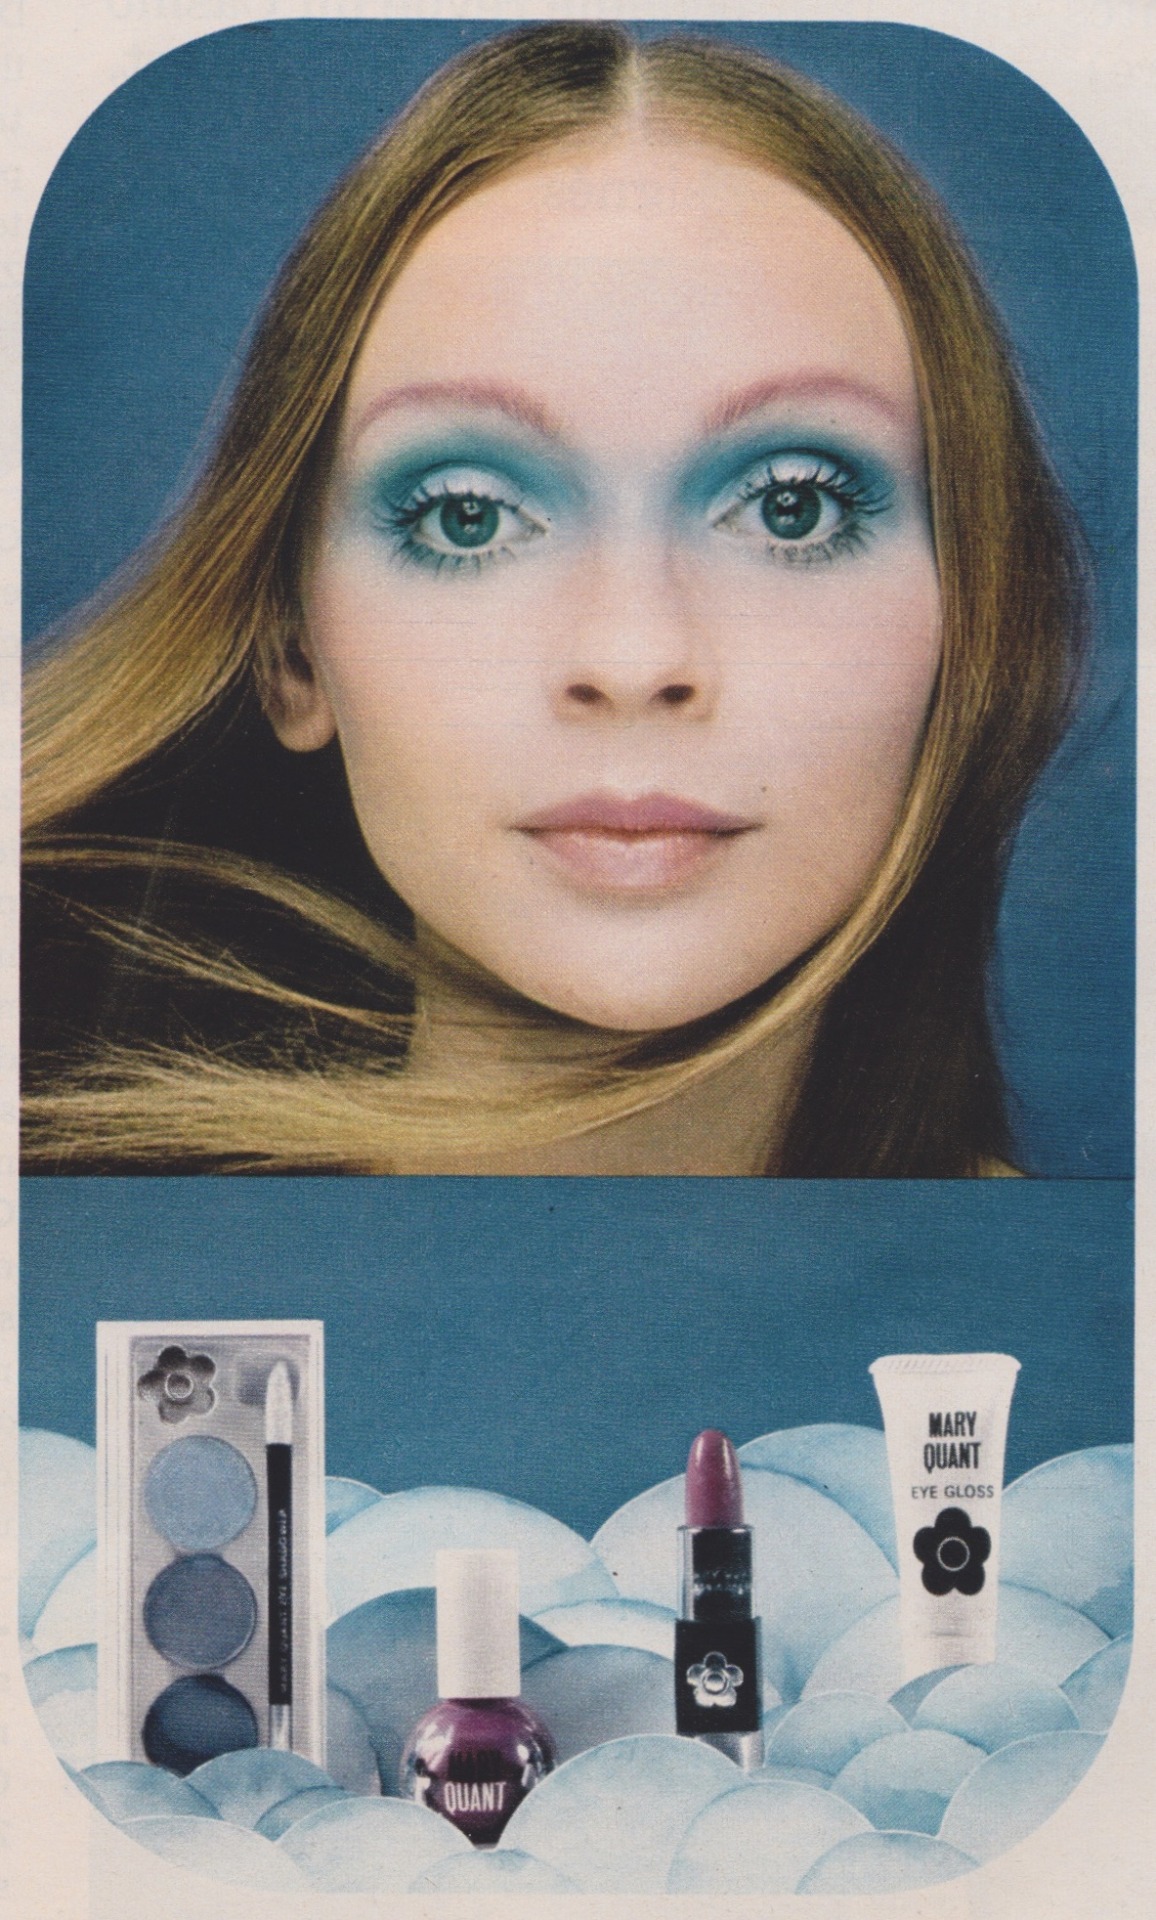 Featherstone Vintage Mary Quant Makeup Advertisement